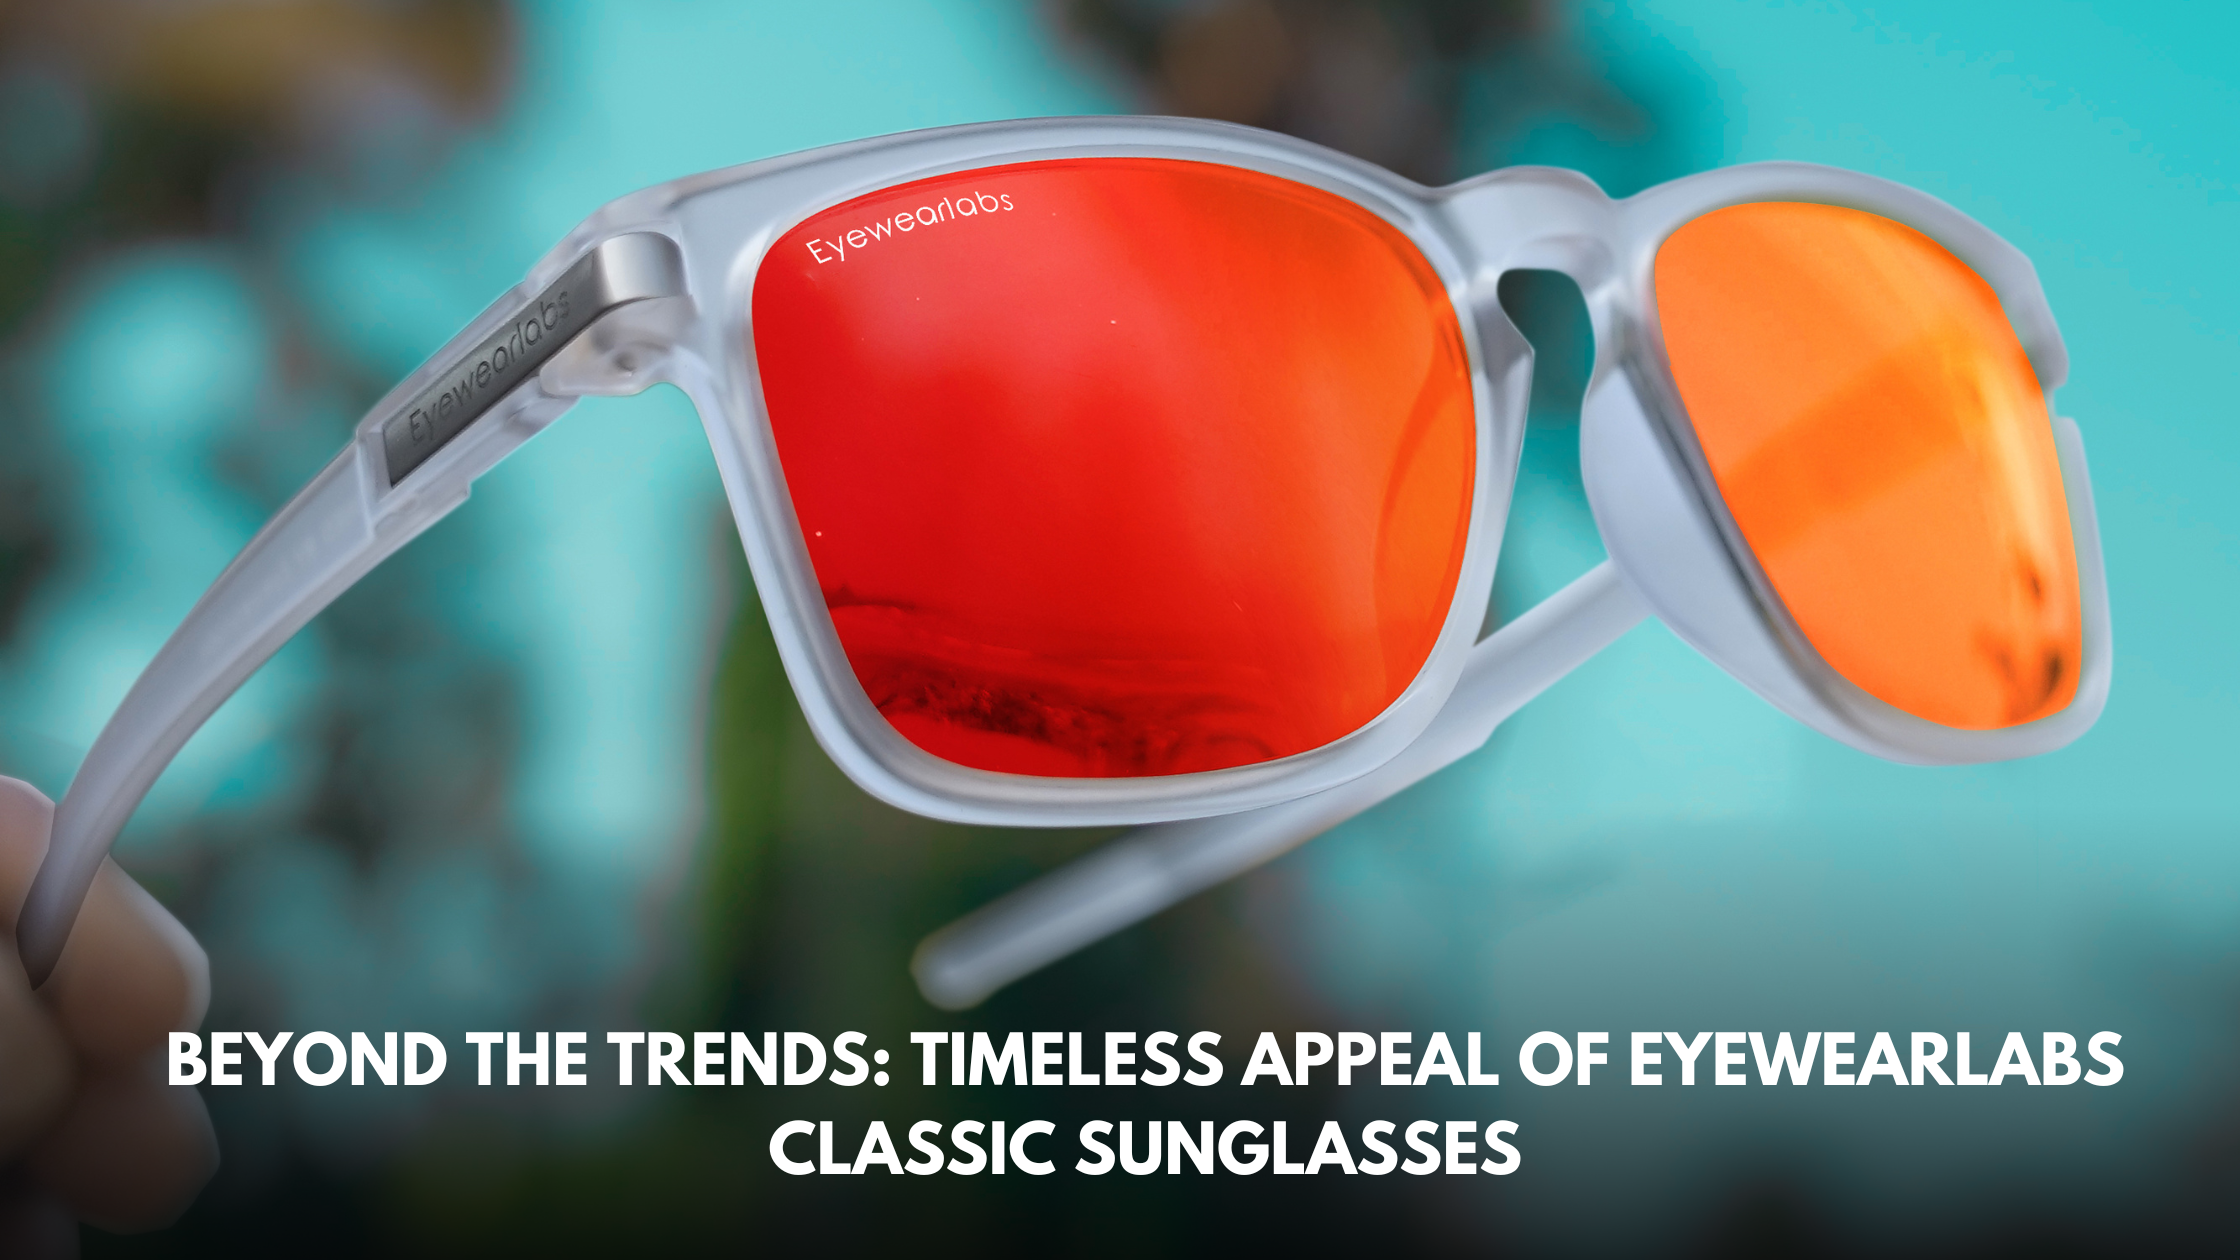 Beyond the Trends: Timeless Appeal of Eyewearlabs Classic Sunglasses